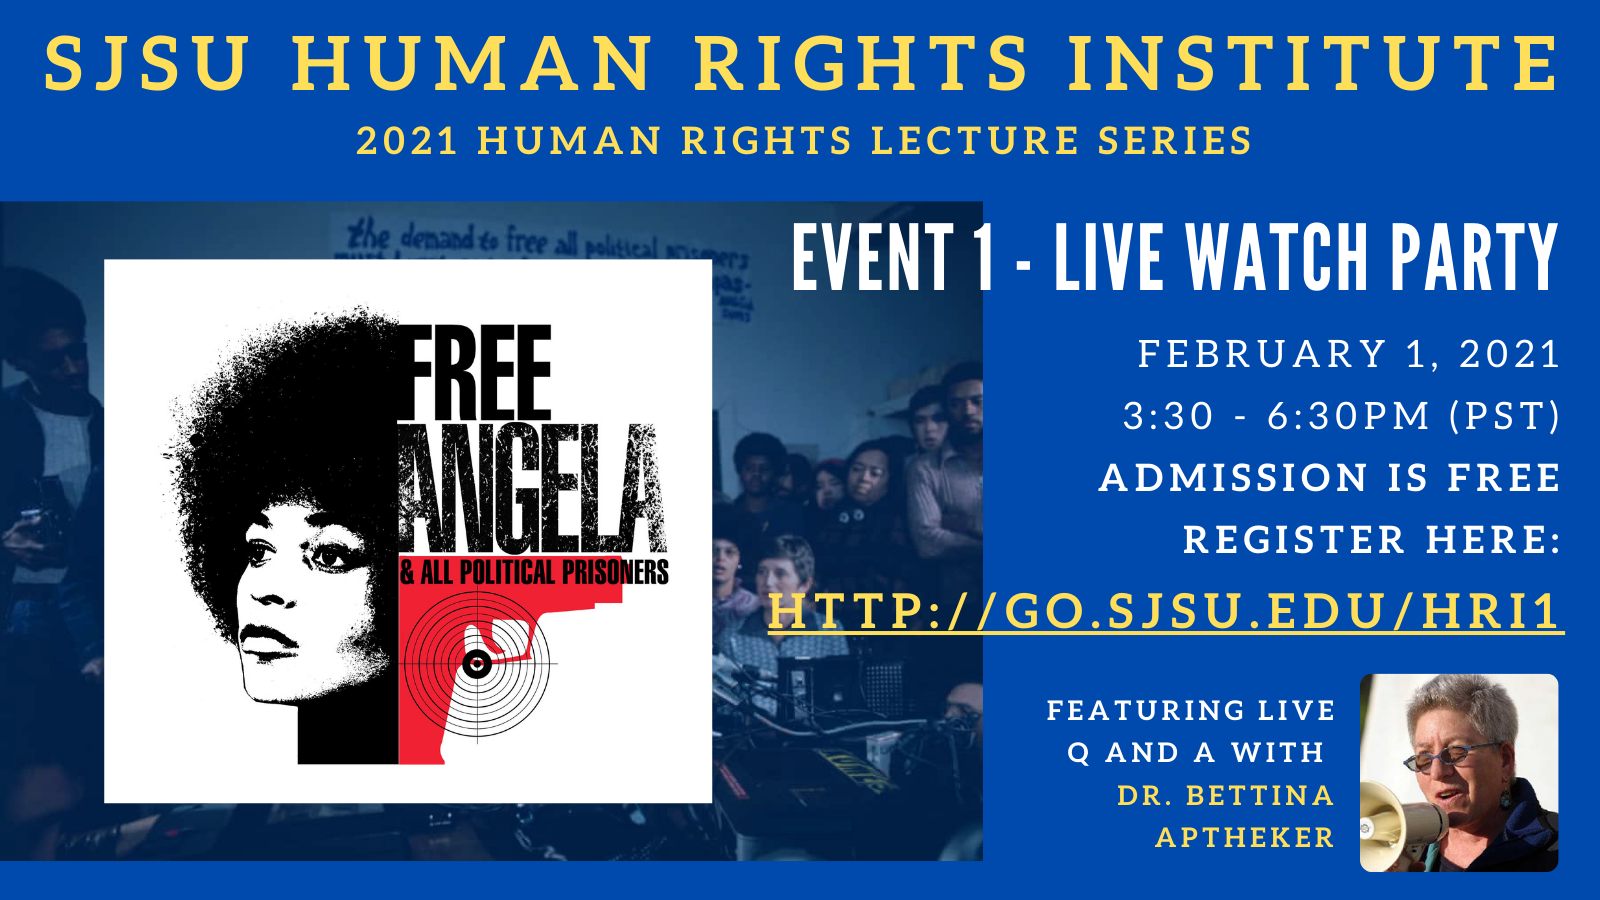 Human Rights Lecture Series Features Lectures on Black Feminism, Socialism and the Work of Dr. Angela Davis